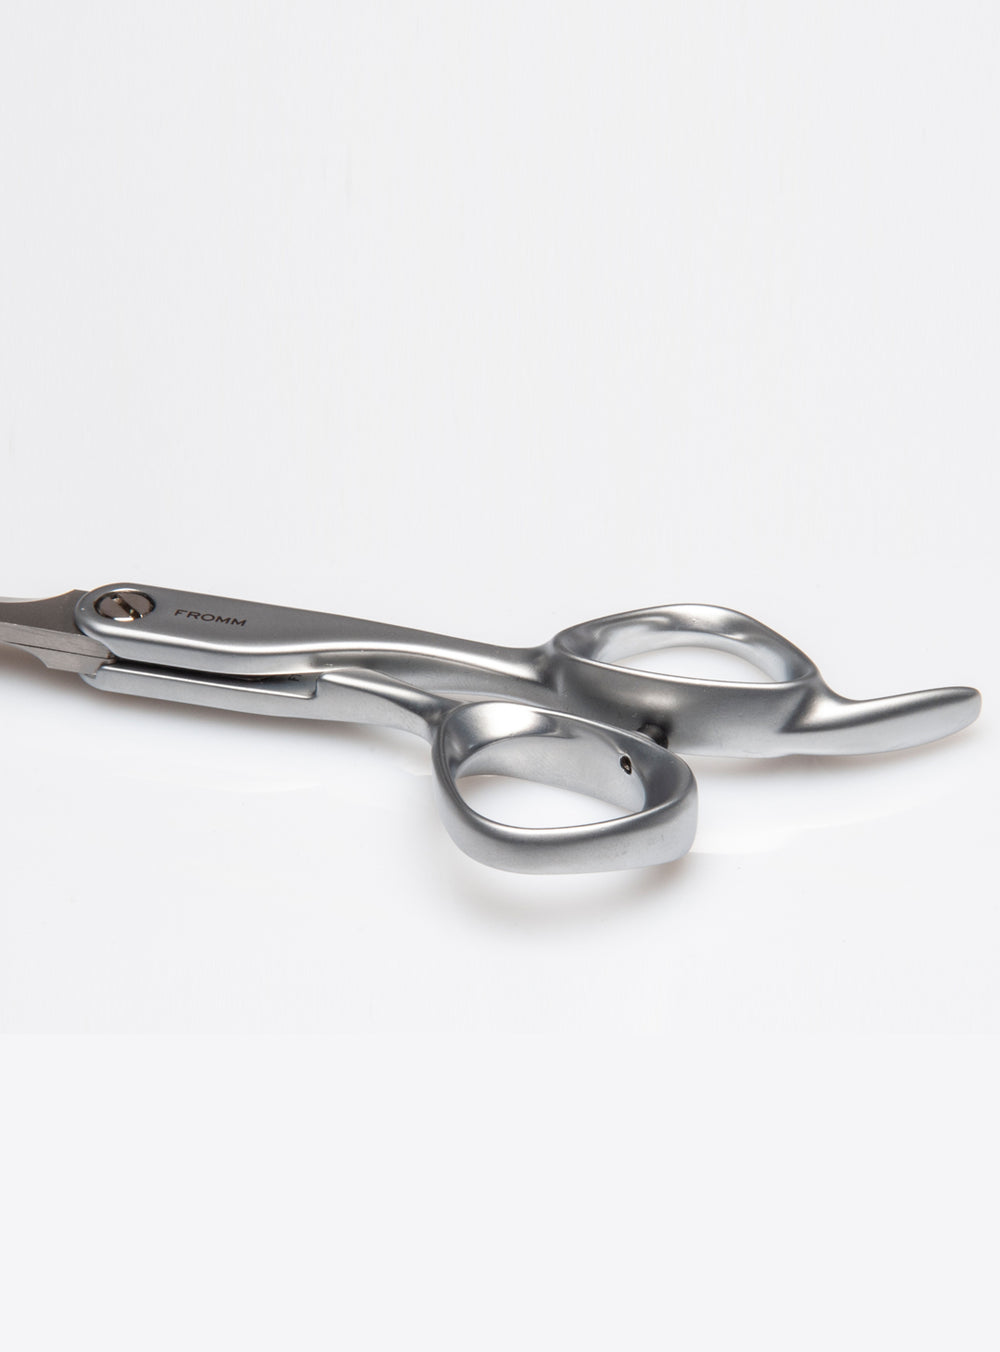 Hair Cutting Scissors 6.6 inches - Professional Stainless Steel